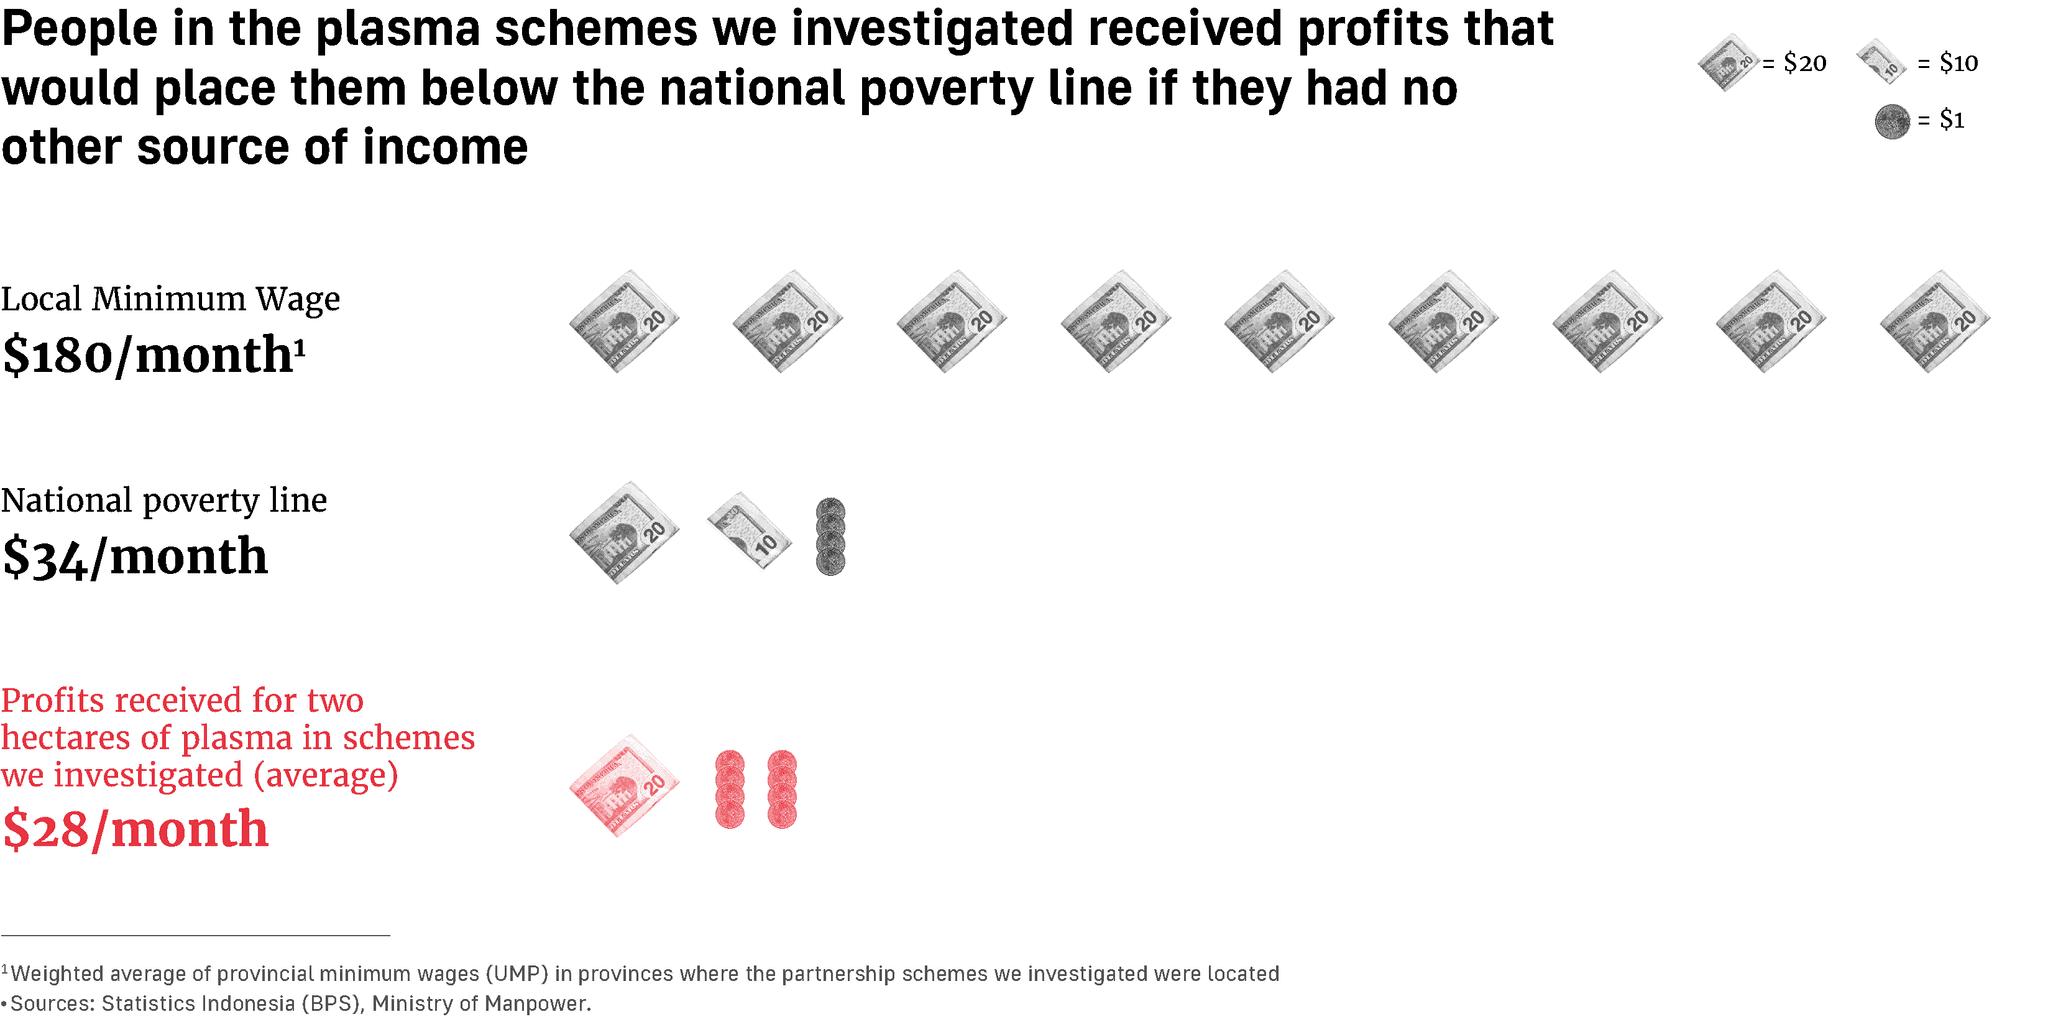 People in the plasma schemes we investigated received profits that would place them below the national poverty line if they had no other source of income